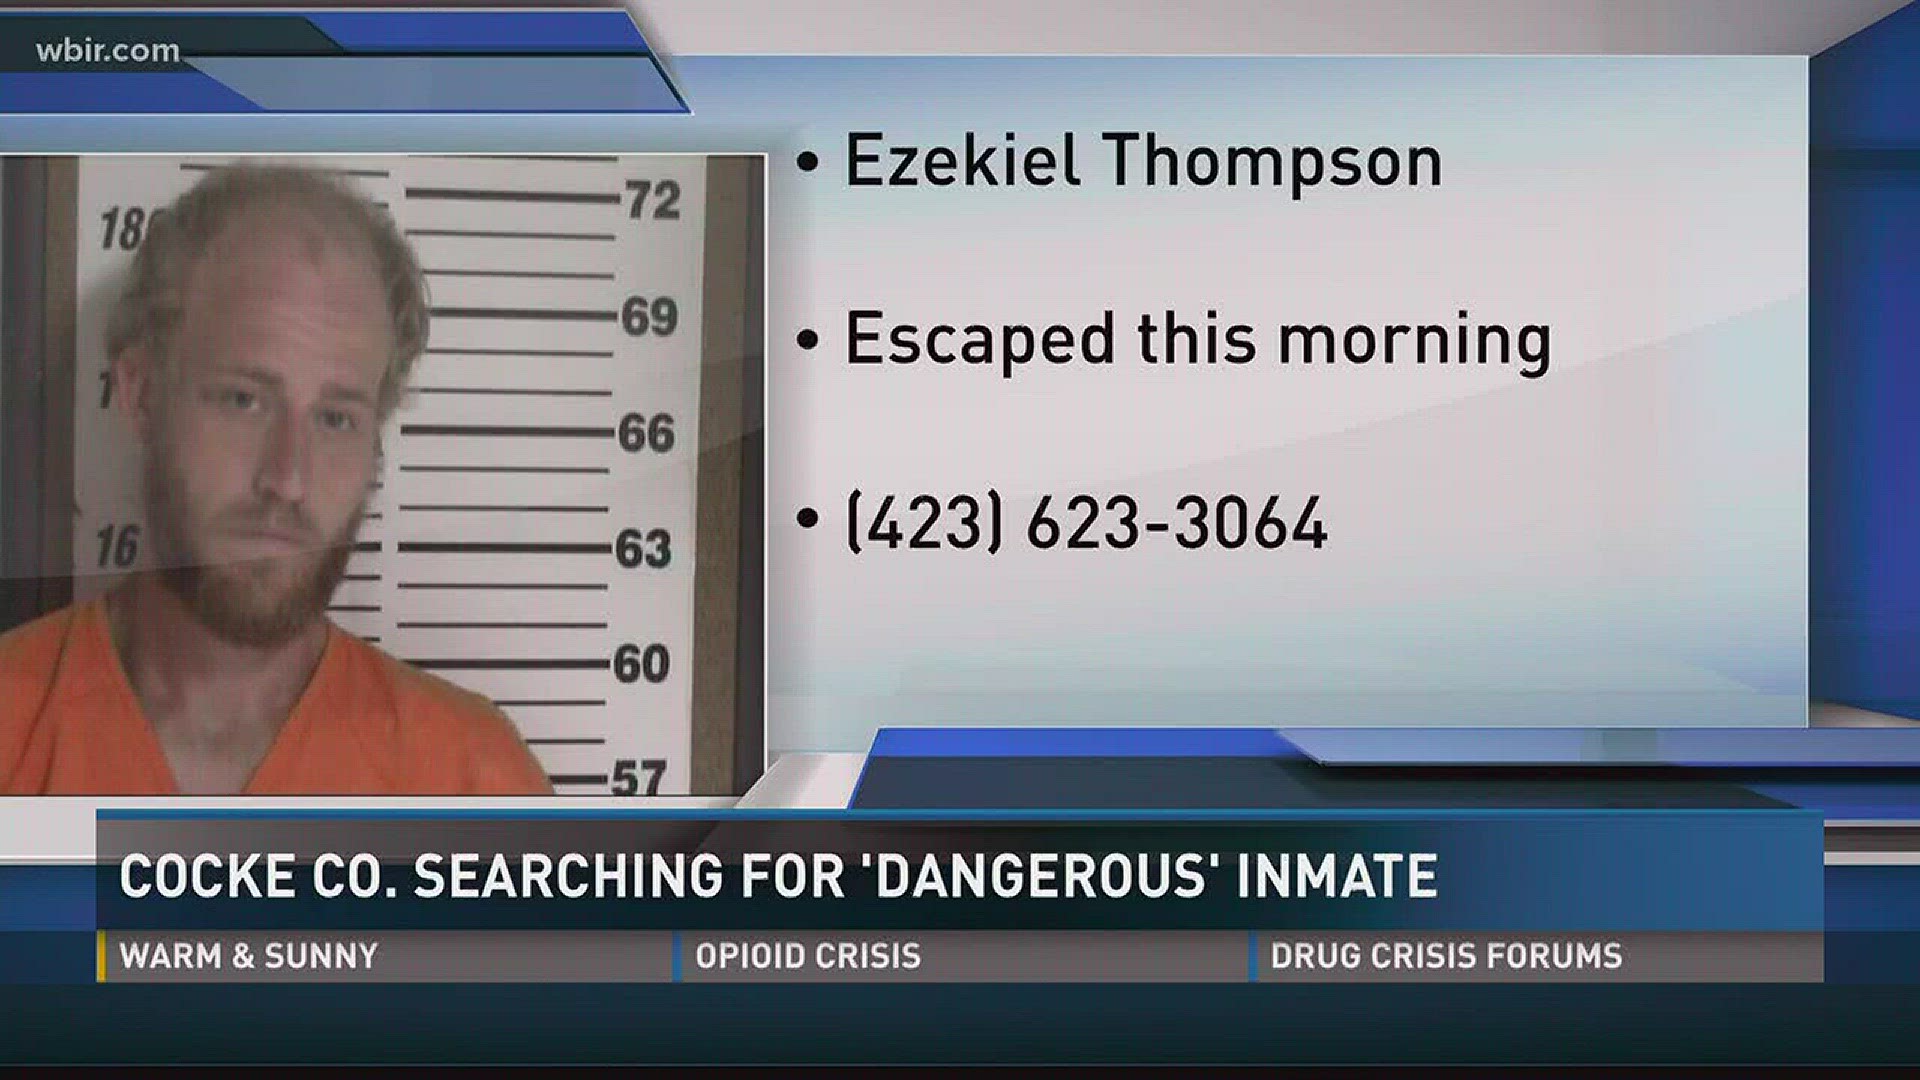 According to the CCSO, 25-year-old Ezekiel Thompson escaped from the Court House Jail after he and another inmate assaulted and seriously injured a corrections officer around 5:25 Thursday morning.